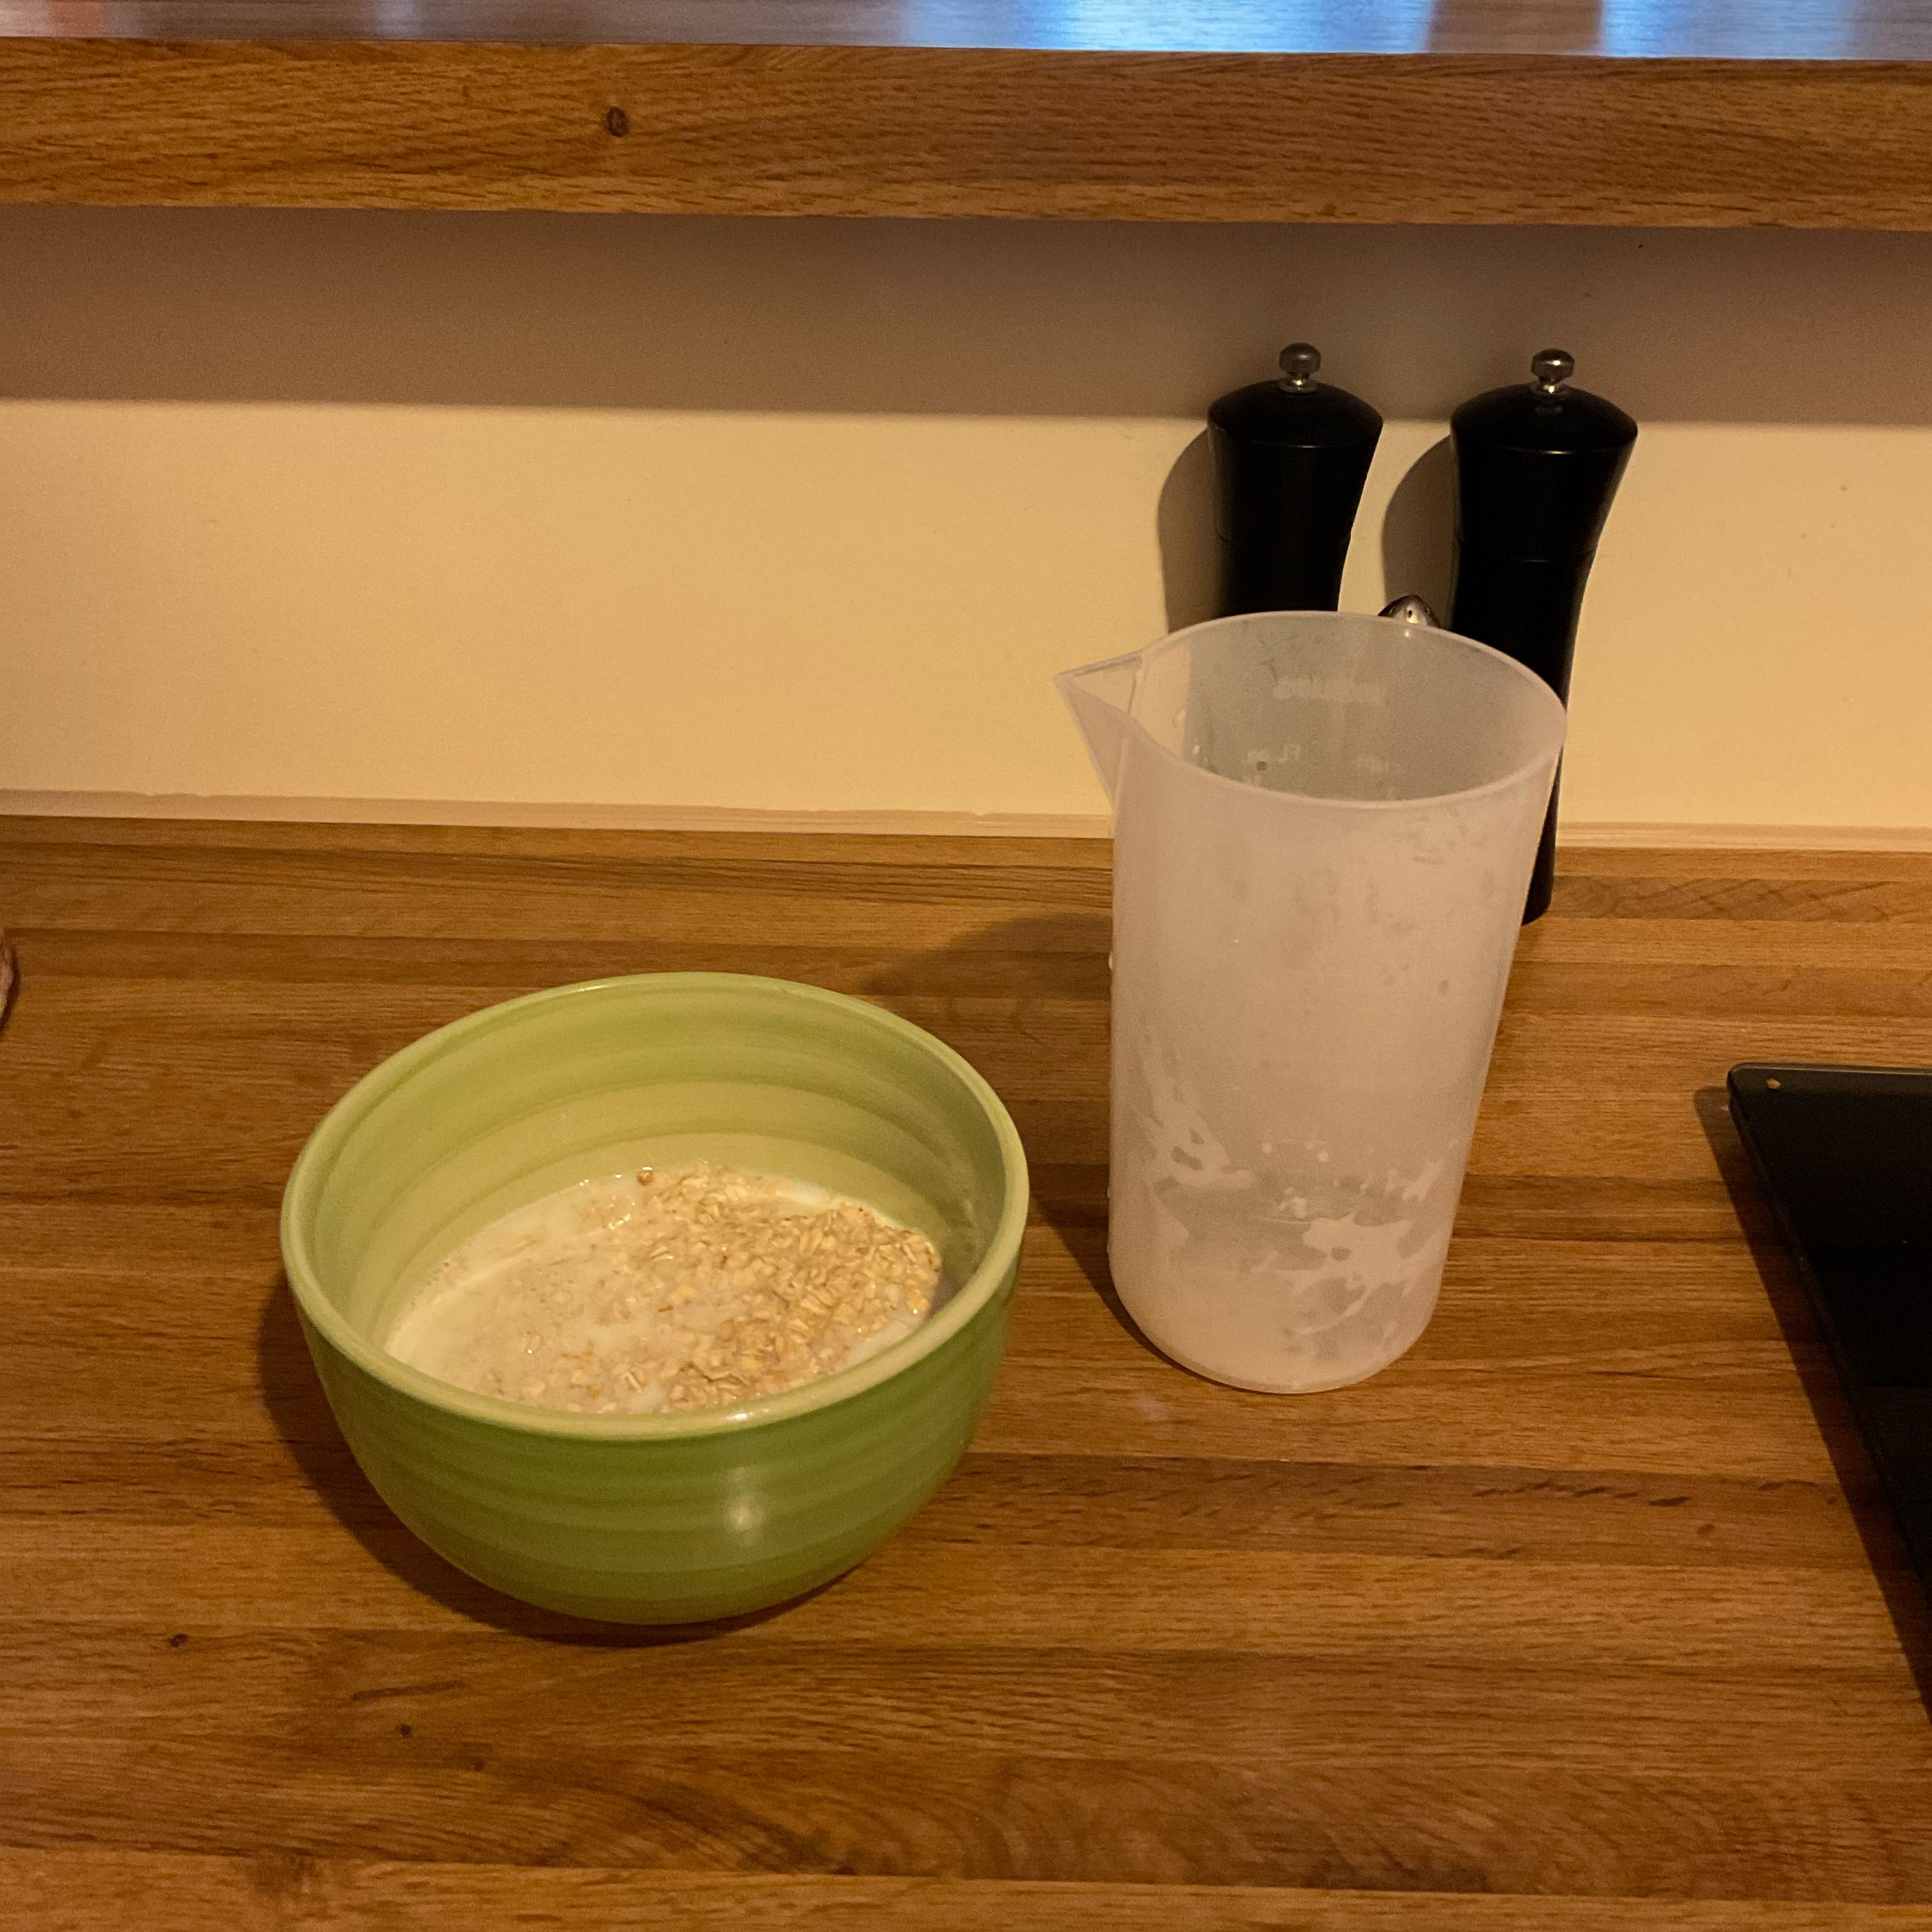 Add warm milk to the oats and let rest for 10 min